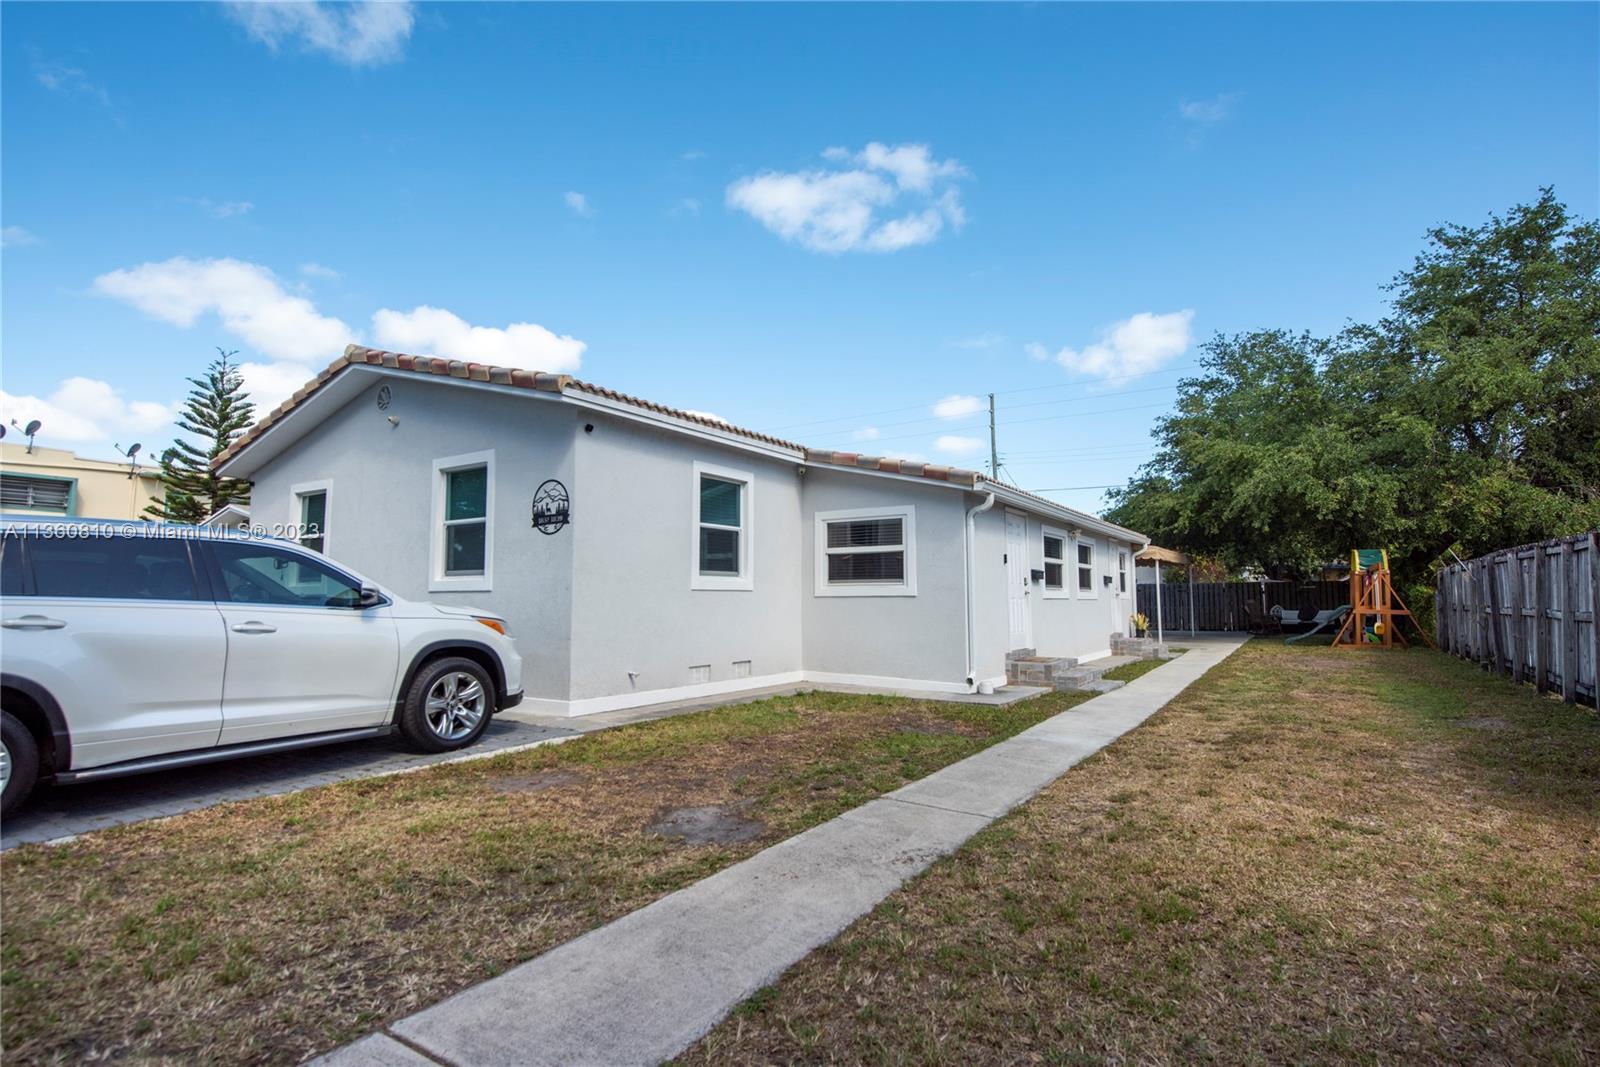 Photo of 1837 Adams St in Hollywood, FL